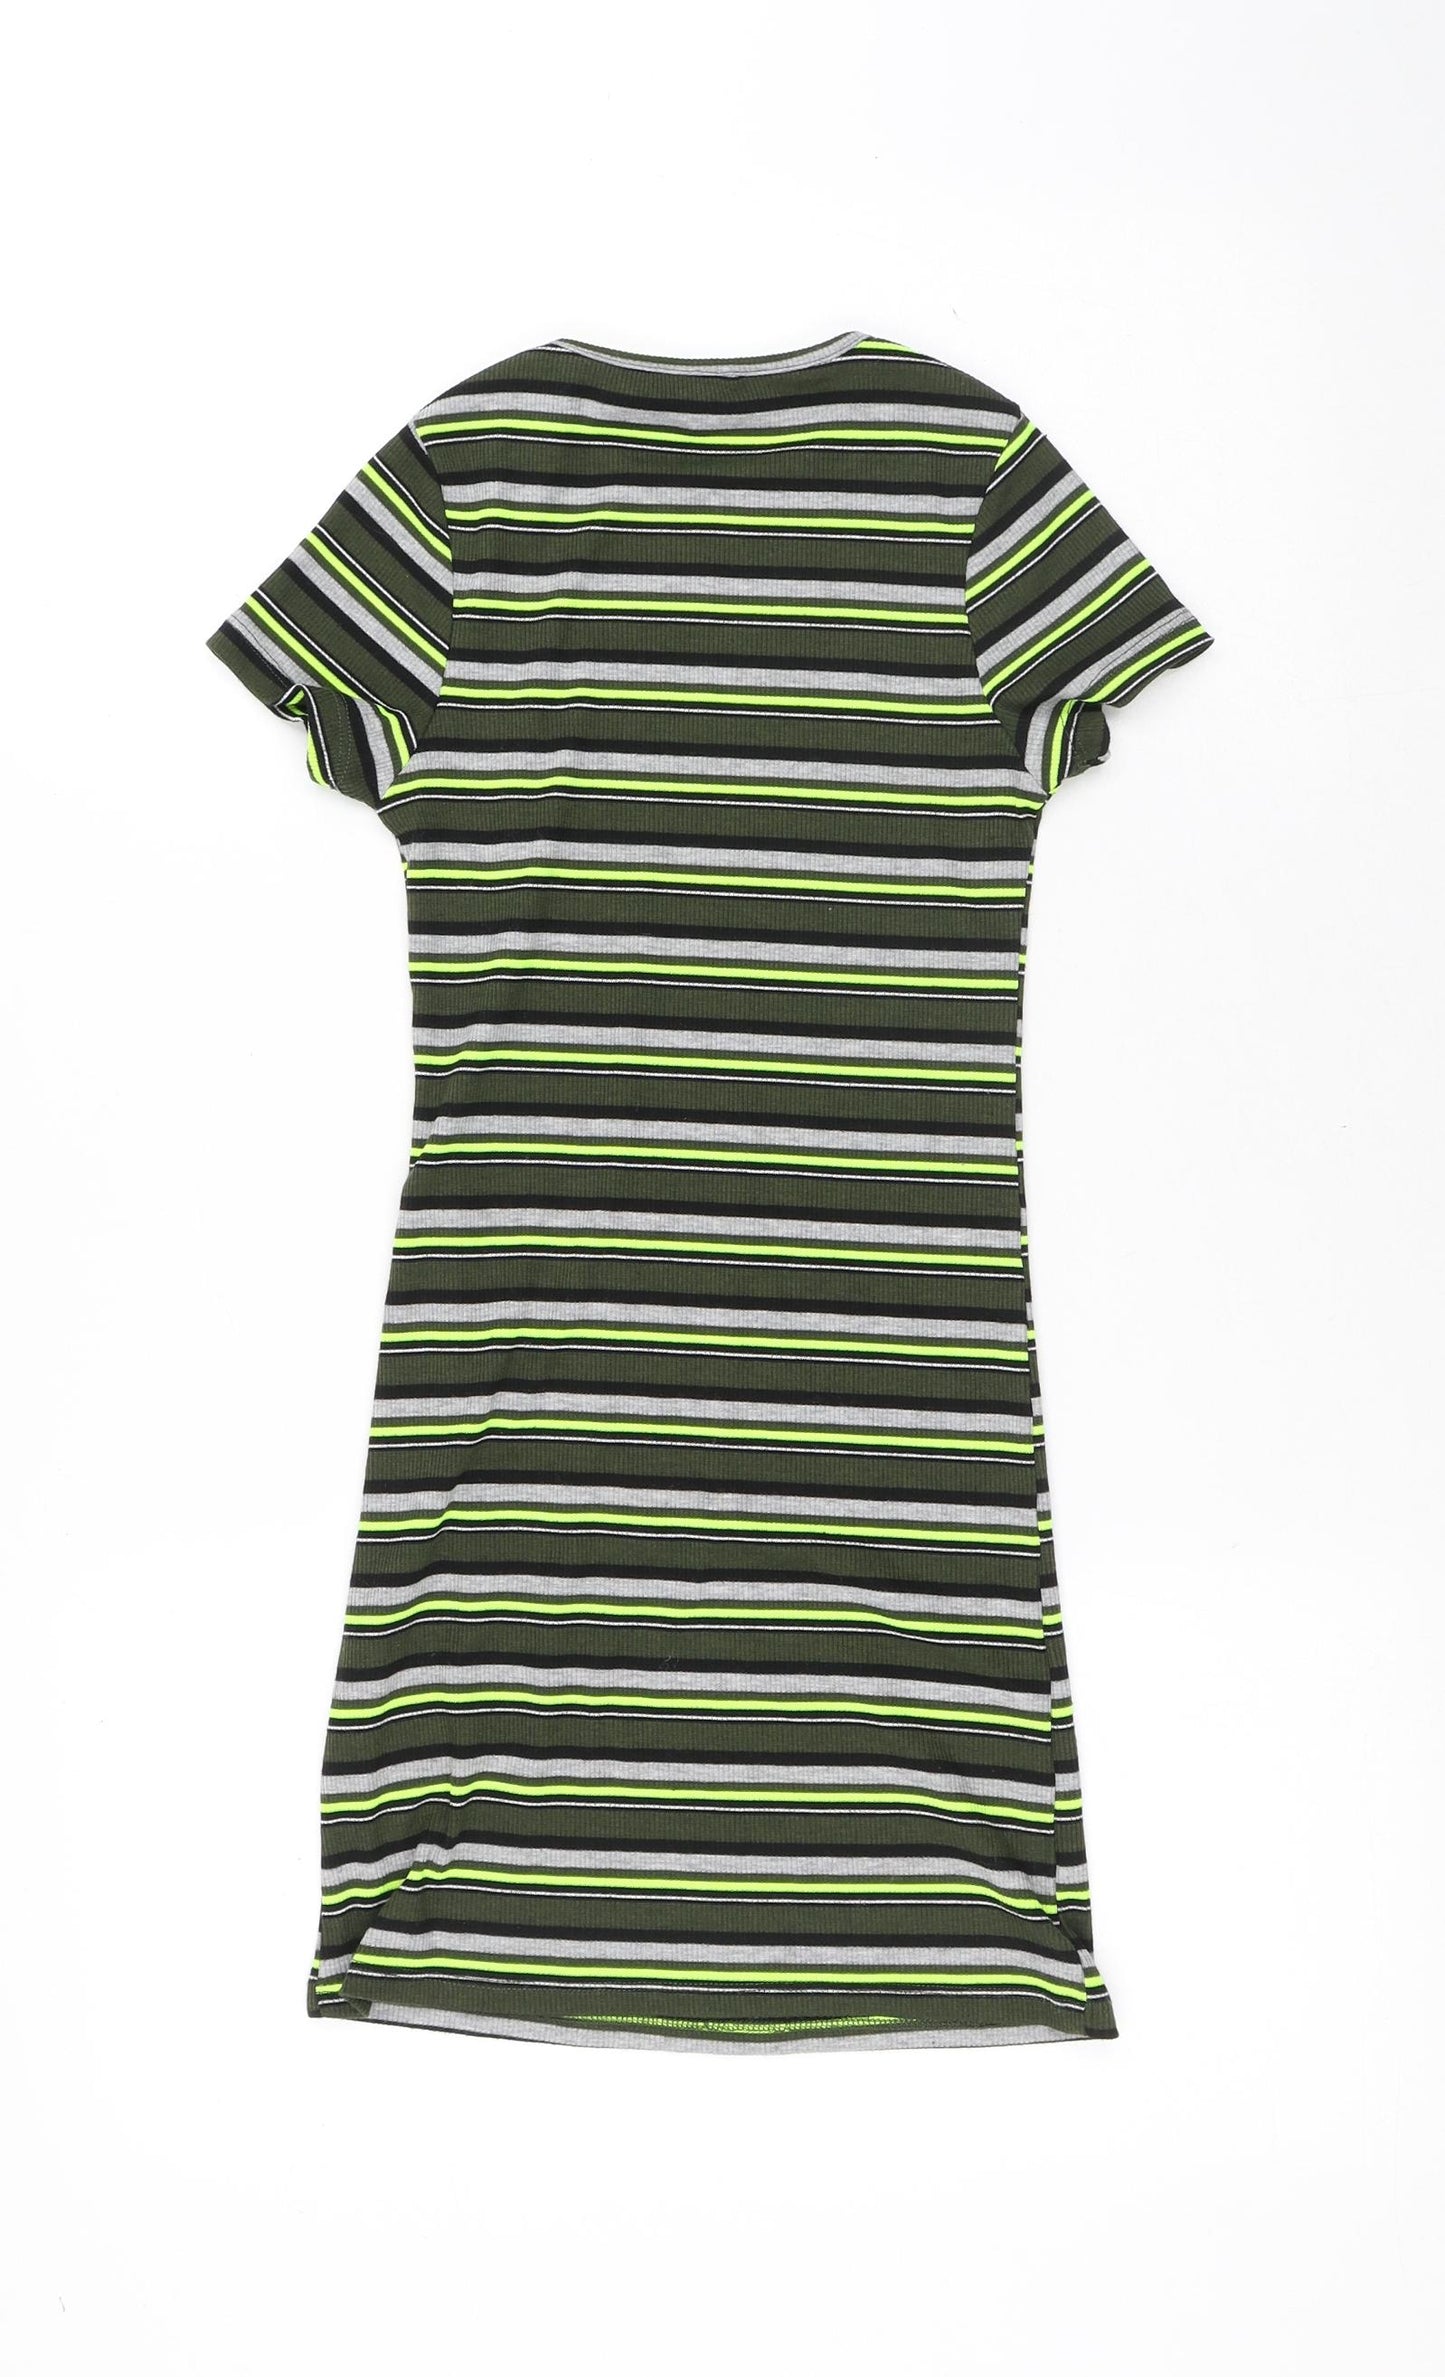 Miss Evie Girls Green Striped Polyester T-Shirt Dress Size 9-10 Years Round Neck Pullover